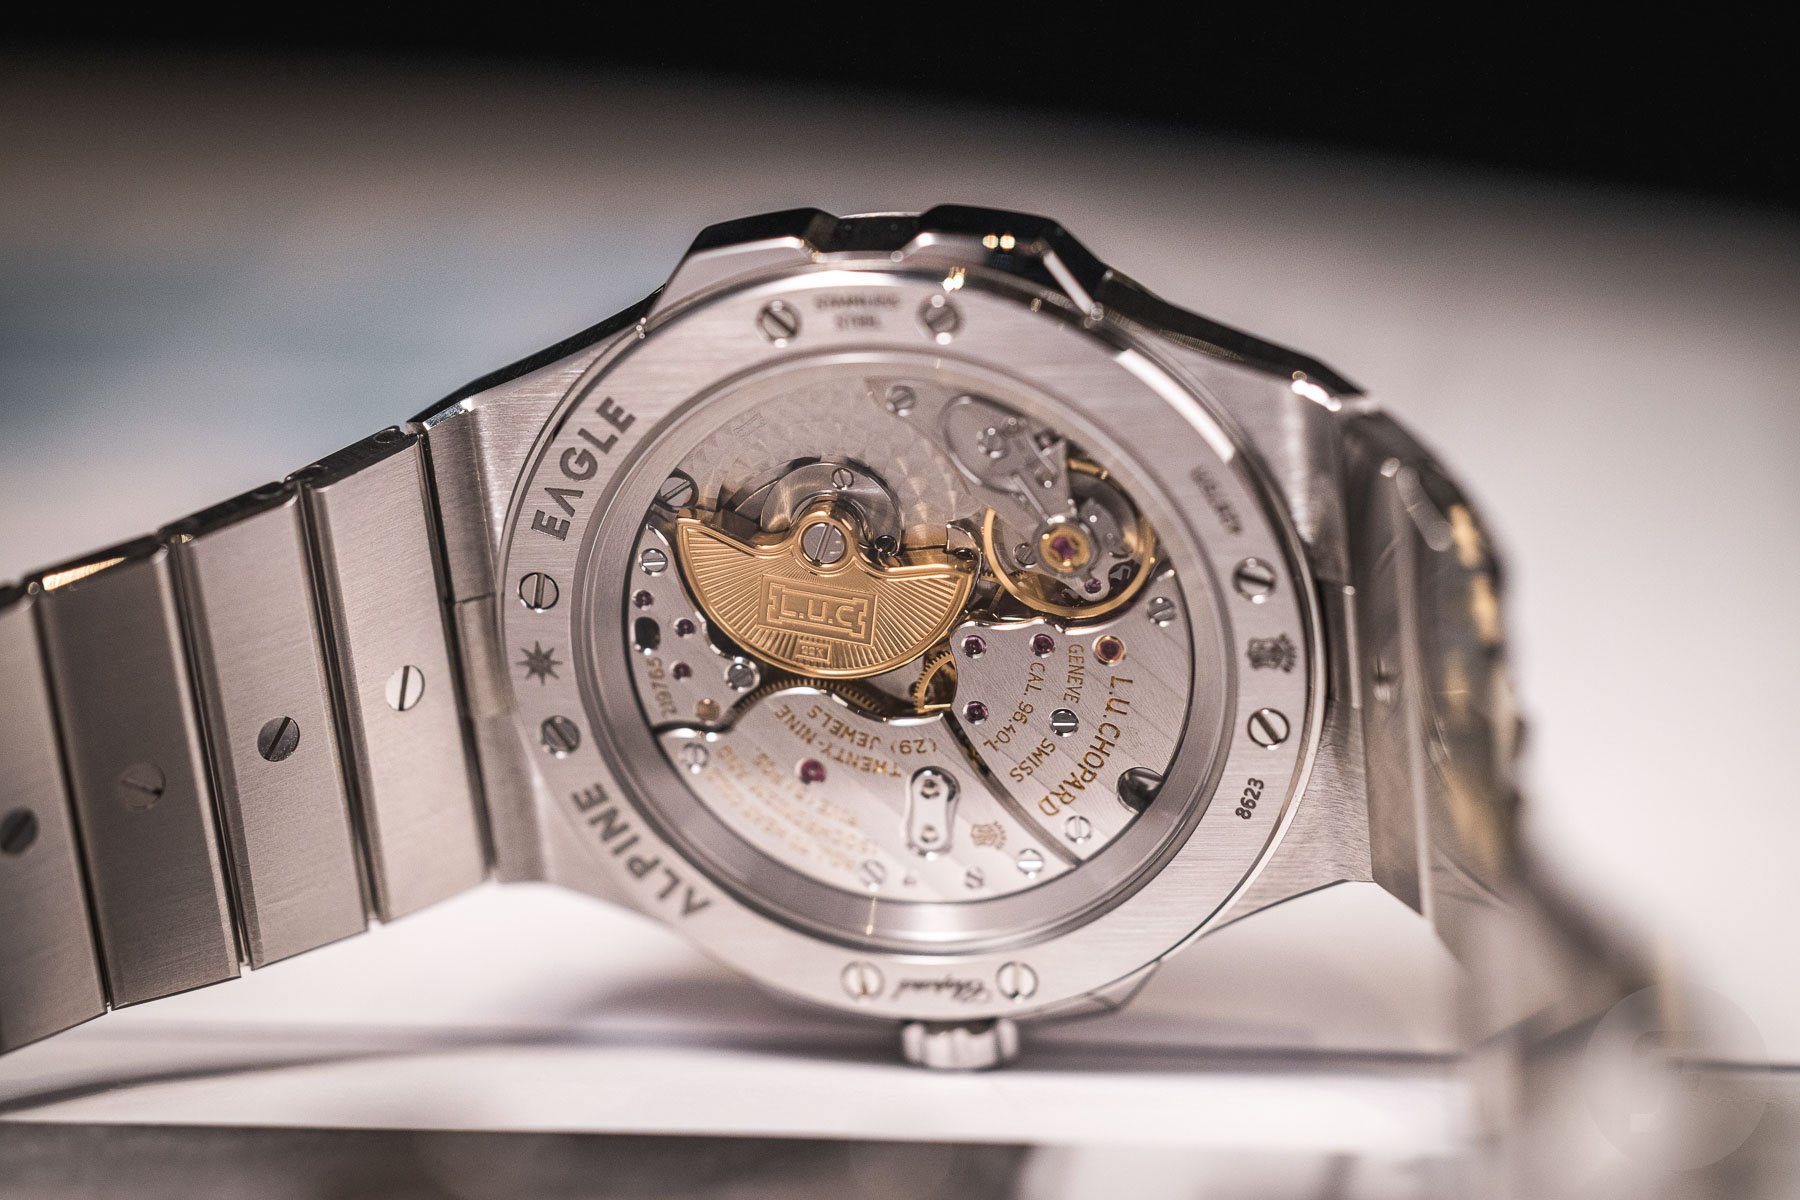 Family friends at Chopard and Wempe create anniversary Alpine Eagle